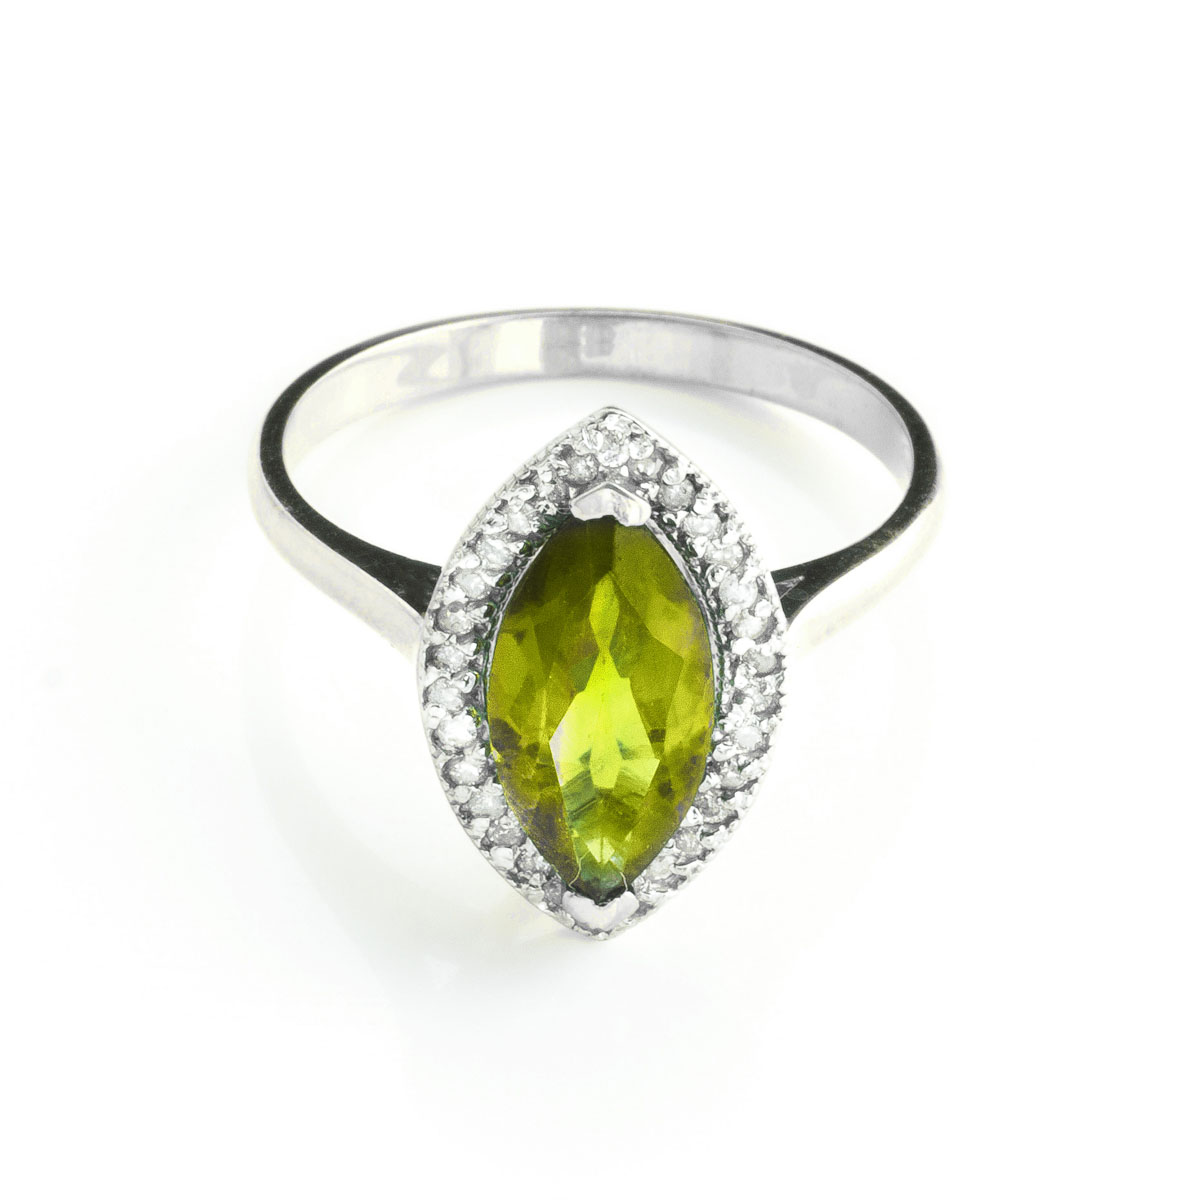 Peridot Halo Ring 2.15 ctw in 9ct White Gold